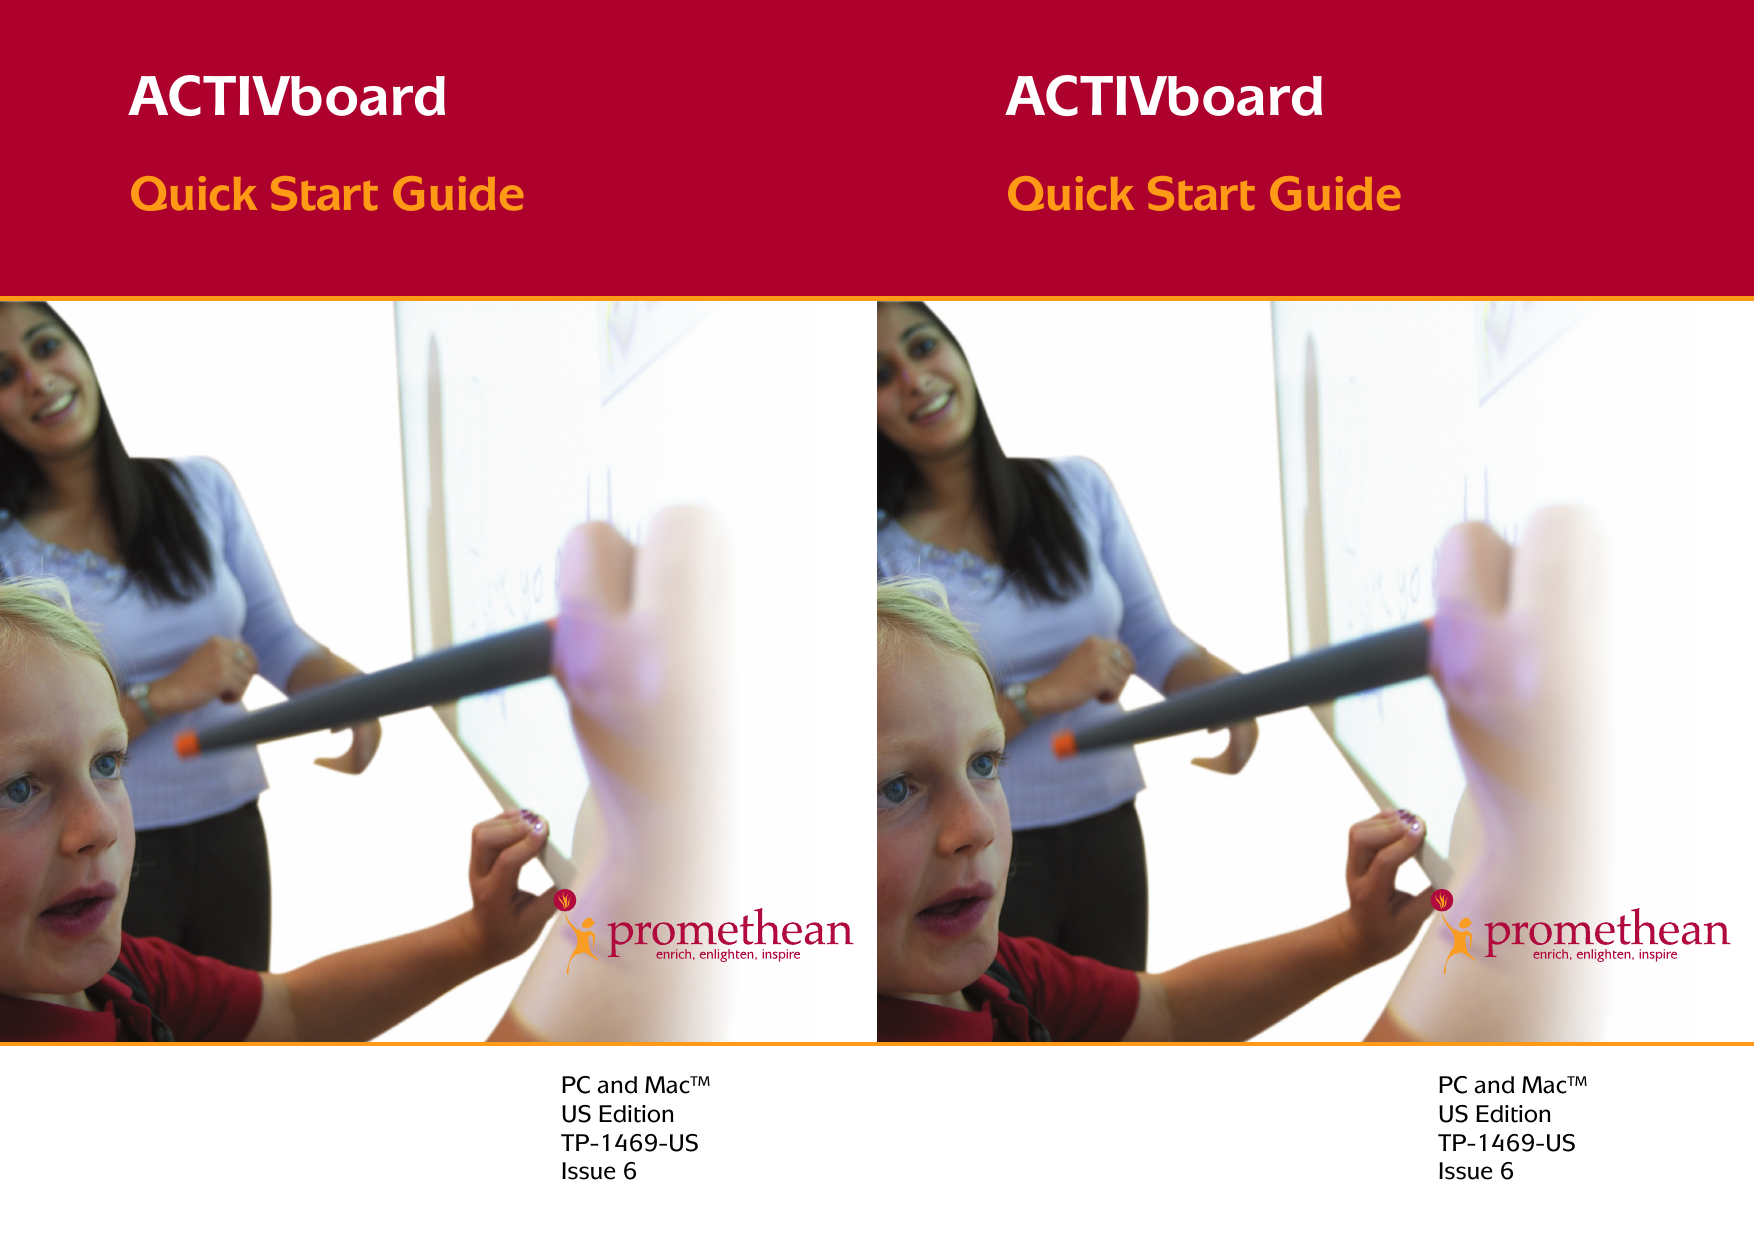 ACTIVboard Quick Start Guide   PC and Mac™ US Edition TP-1469-US Issue 6 ACTIVboard Quick Start Guide   PC and Mac™ US Edition TP-1469-US Issue 6 